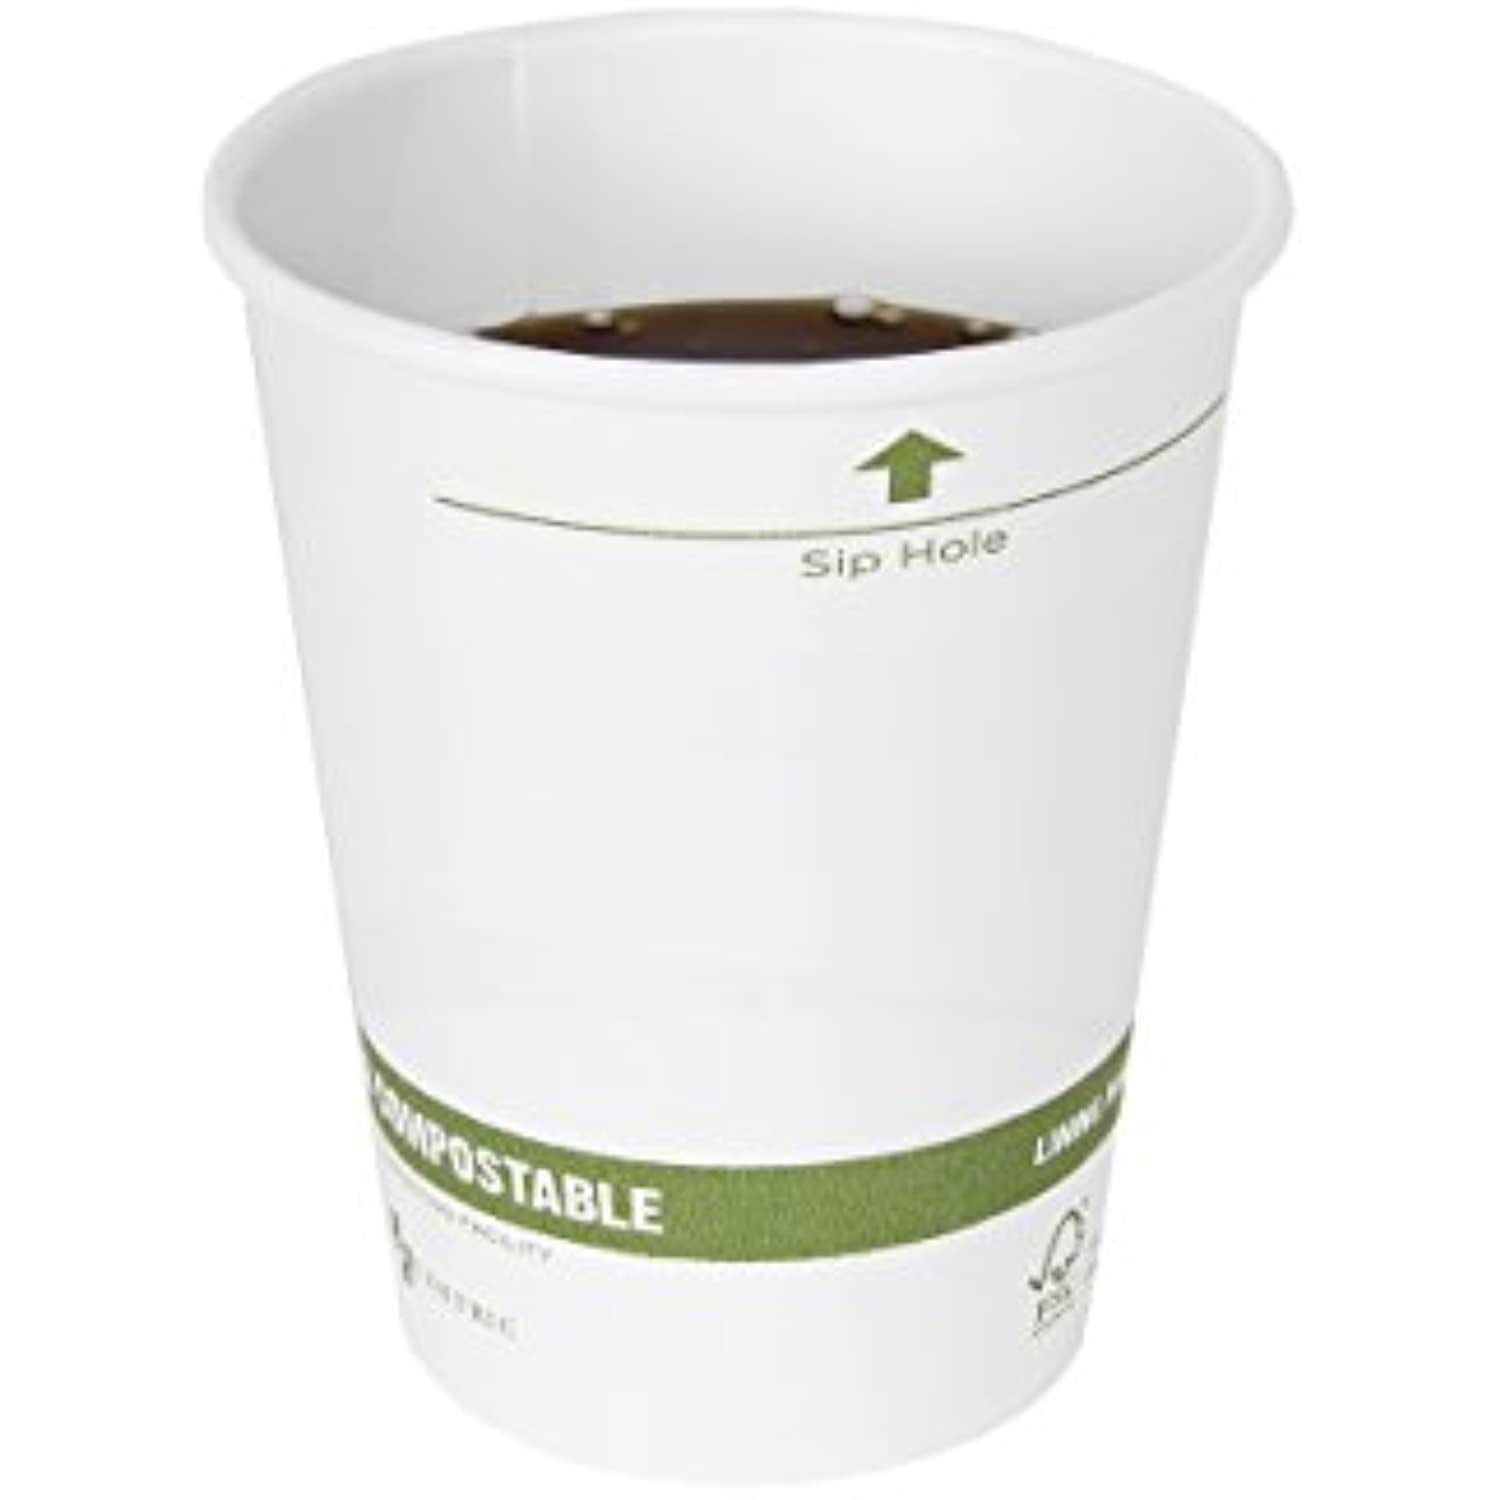 Swig - The new and improved Swig Cup is here Introducing our  Biodegradable Styrofoam!🙌🏽 Our cups can biodegrade up to 92% in only four  years!😍 This is HUGE in comparison to most